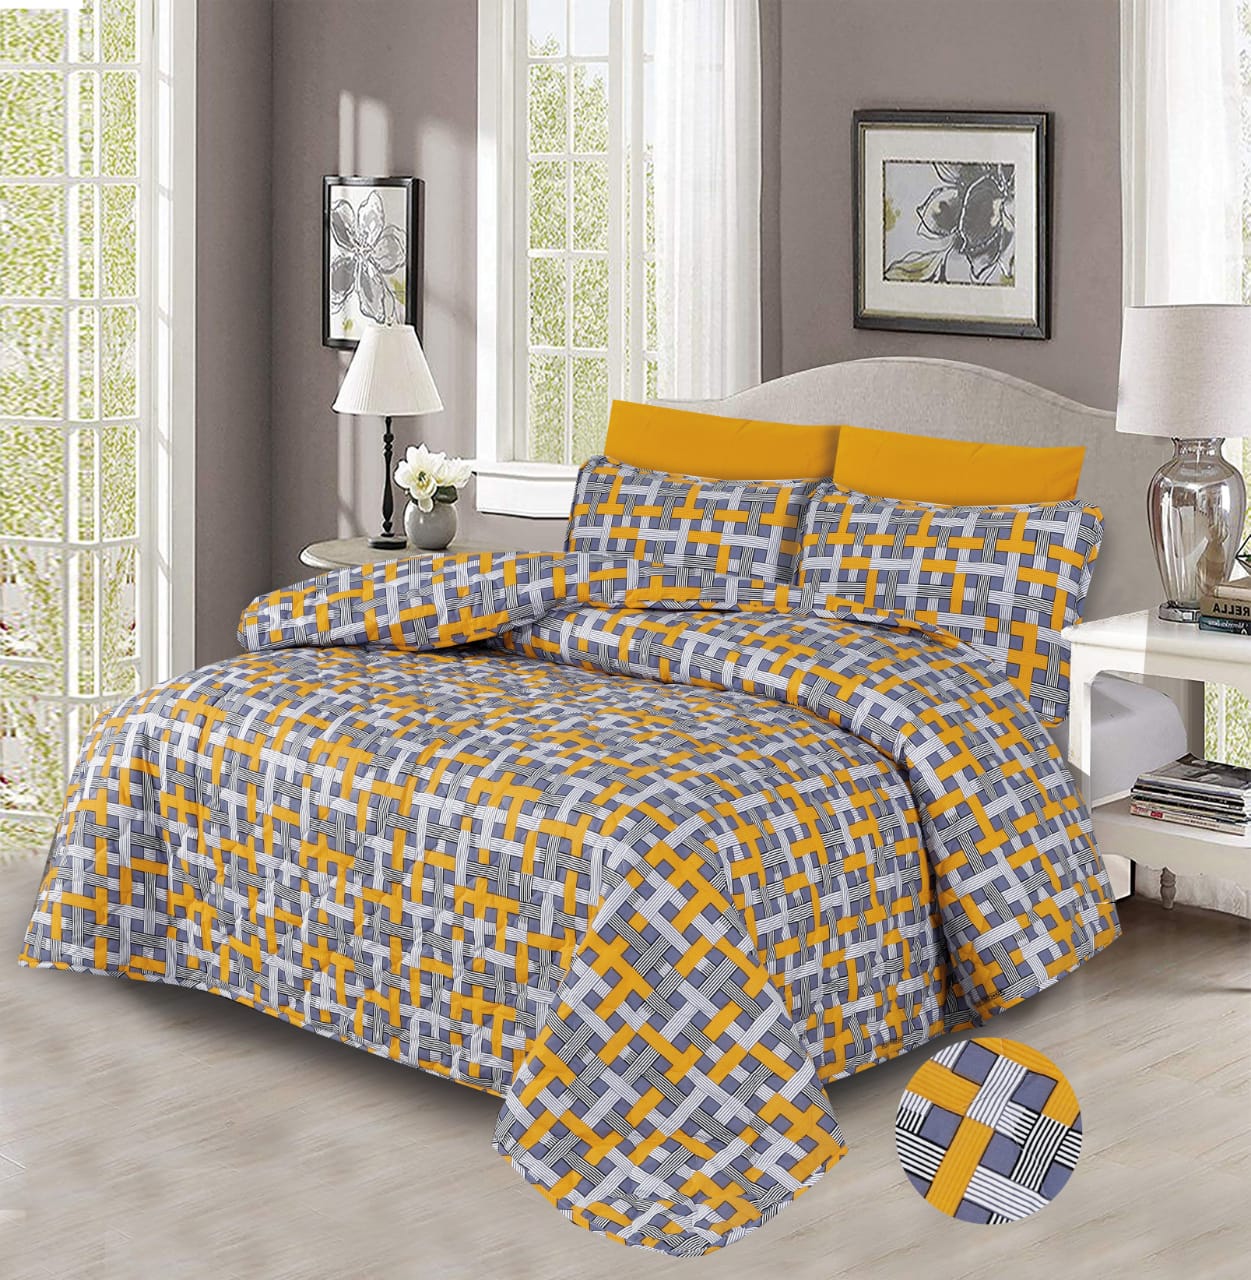 Bed Spread Set Quilted Design 0119